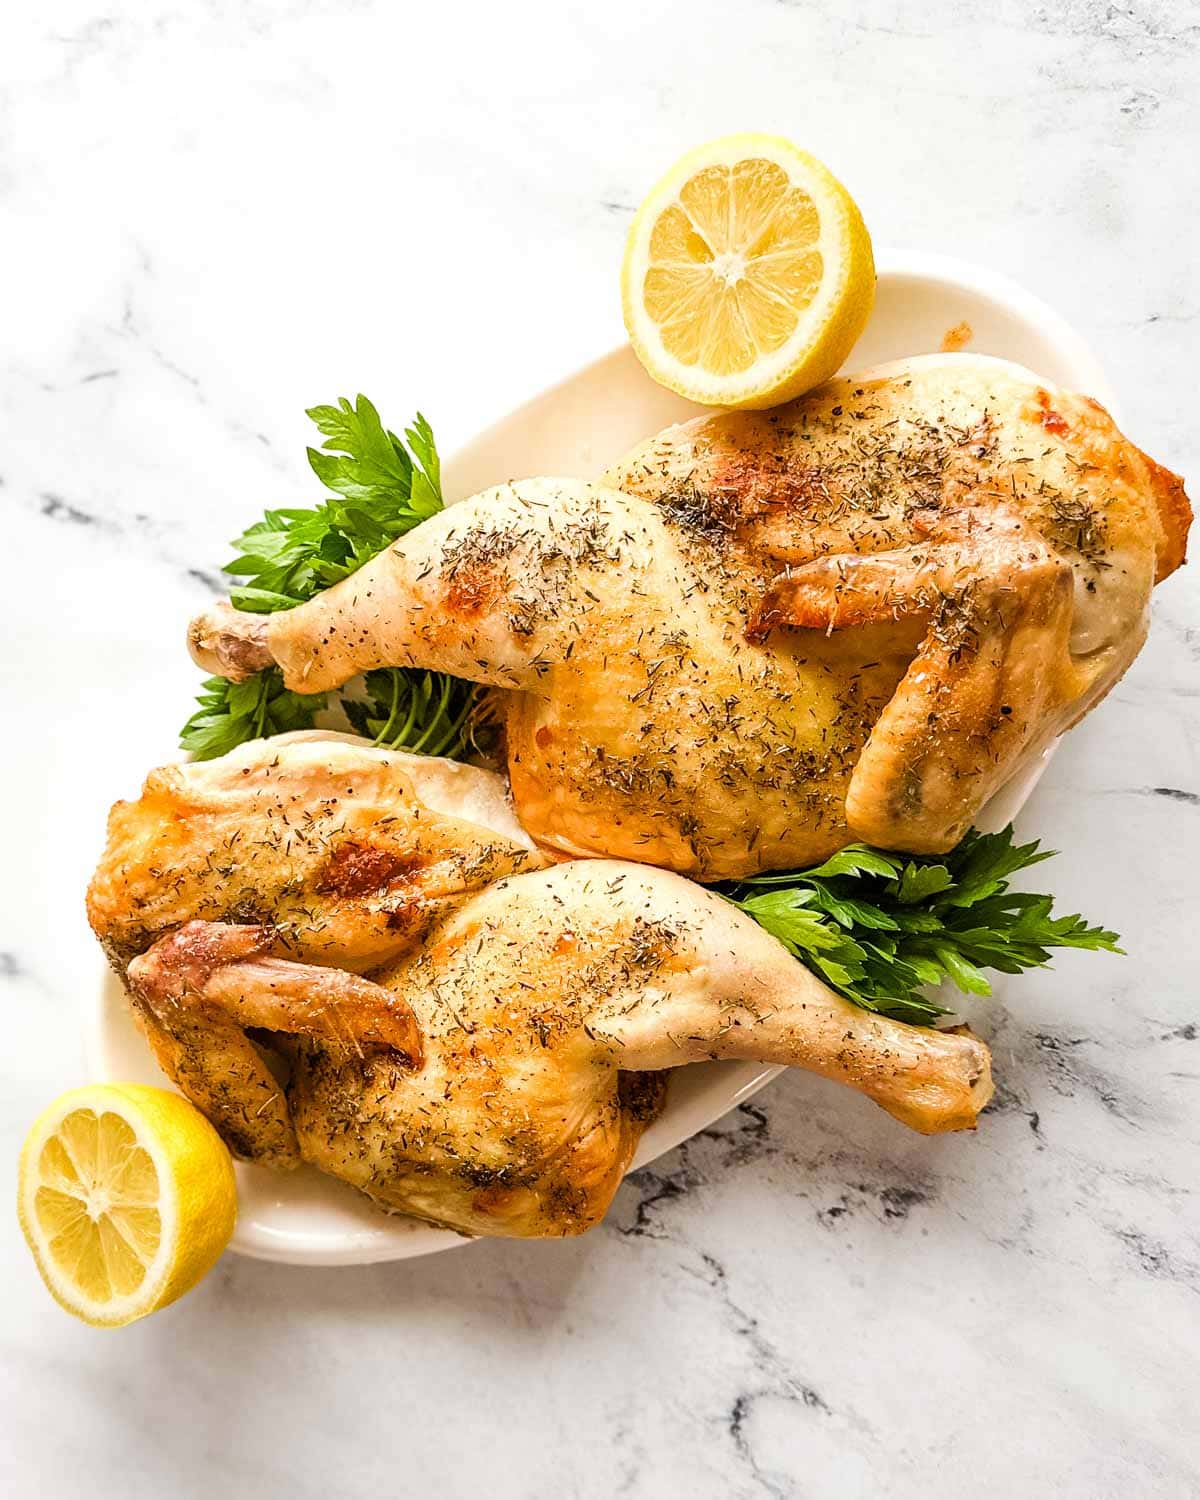 Two halves of a roasted chicken on a white platter with parsley and lemons.